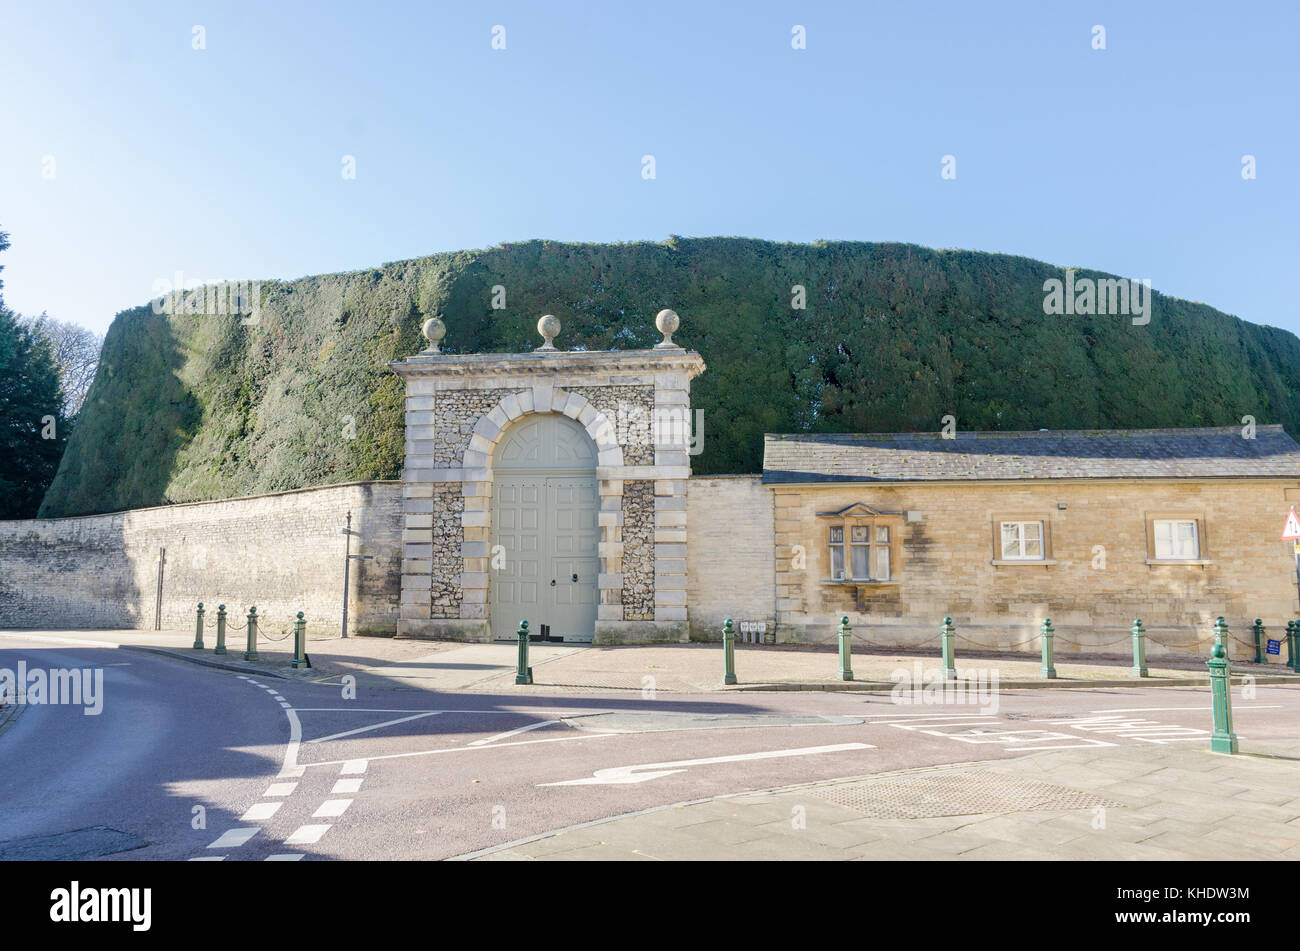 Entrance to the Bathurst Estate at Cirencester Park in Park Street, Cirencester, Gloucestershire, UK Stock Photo